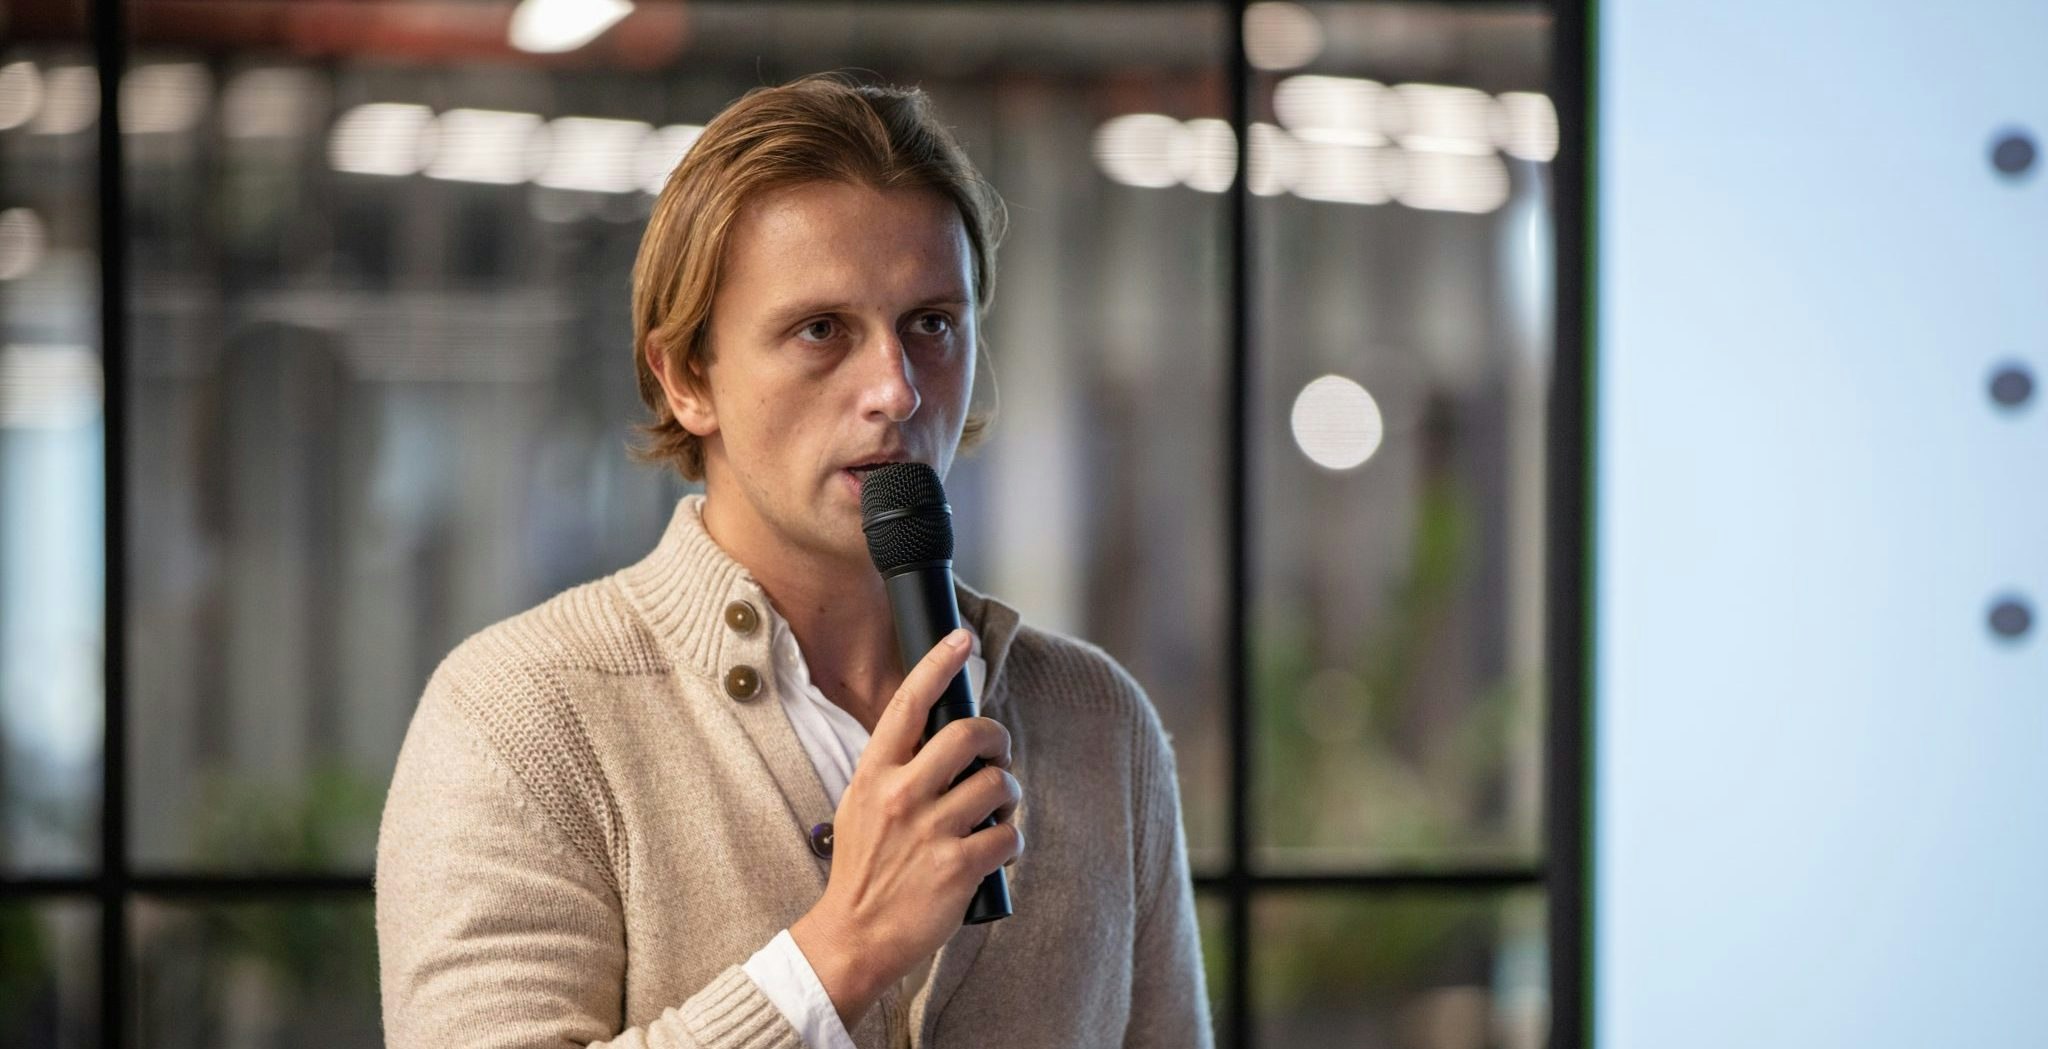 Why do Klarna, Revolut and Bolt want to become Europe's superapp?